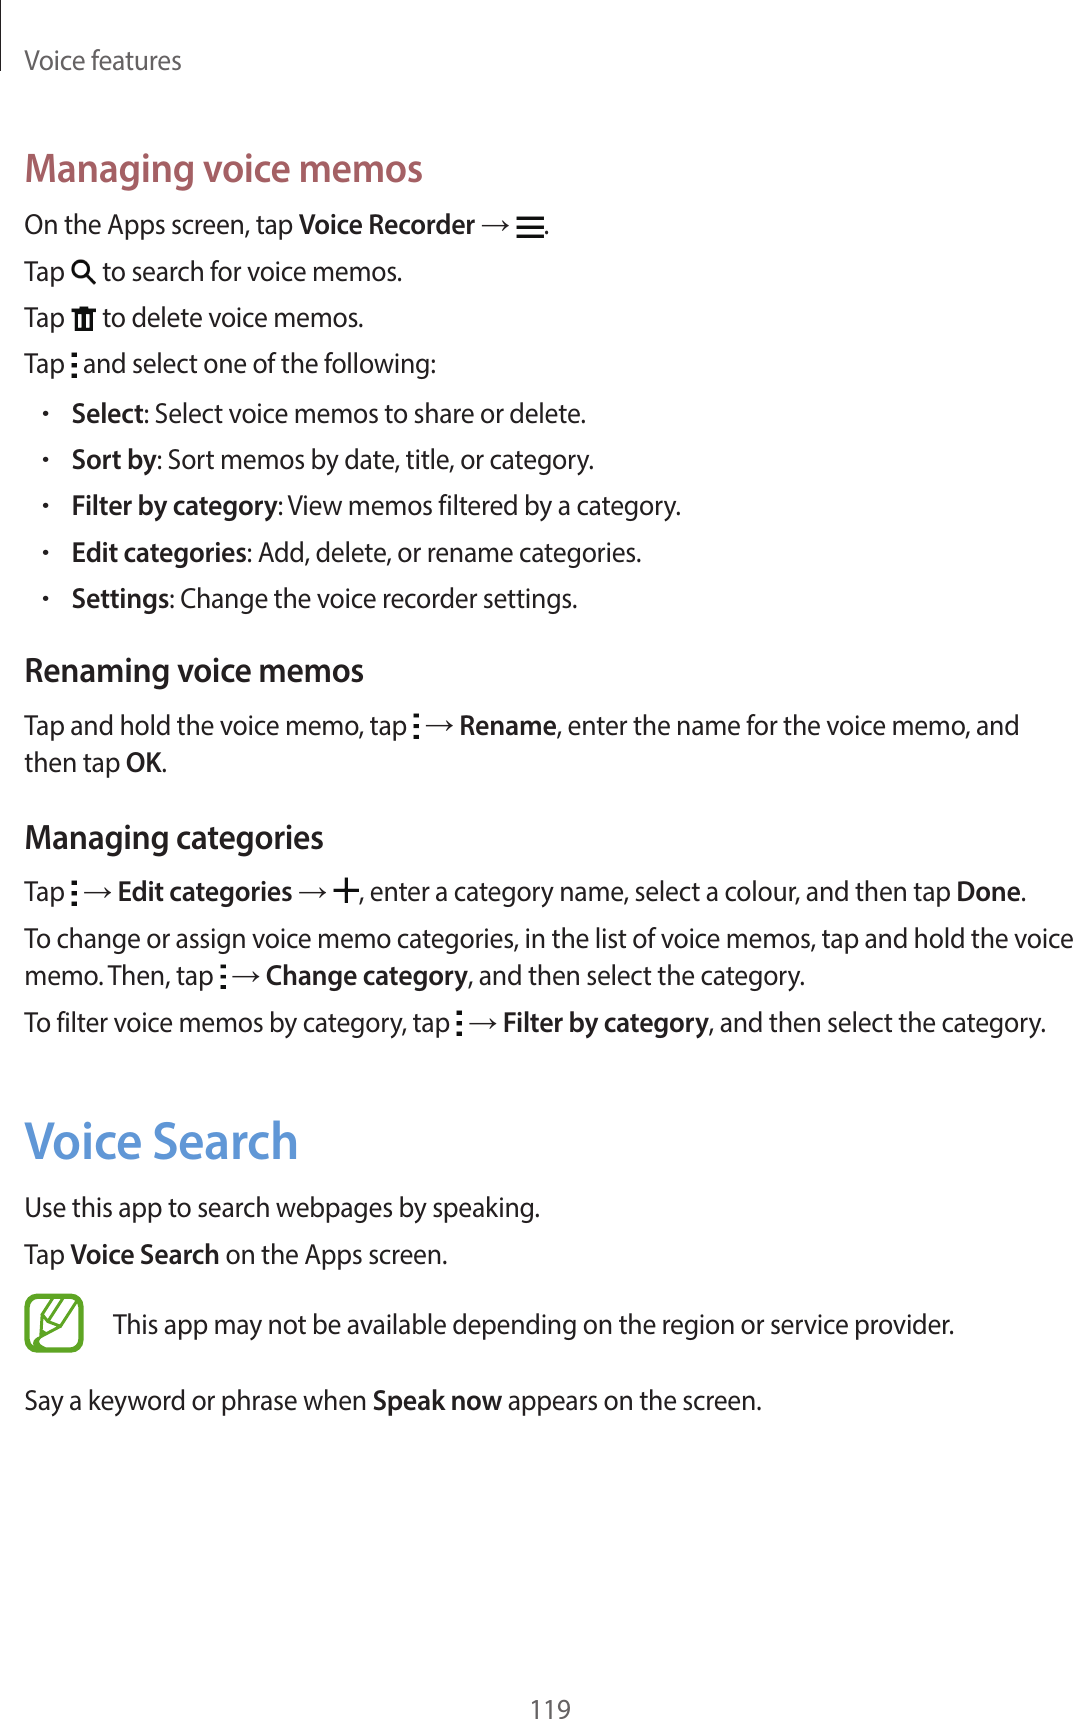 Voice features119Managing voice memosOn the Apps screen, tap Voice Recorder →  .Tap   to search for voice memos.Tap   to delete voice memos.Tap   and select one of the following:•Select: Select voice memos to share or delete.•Sort by: Sort memos by date, title, or category.•Filter by category: View memos filtered by a category.•Edit categories: Add, delete, or rename categories.•Settings: Change the voice recorder settings.Renaming voice memosTap and hold the voice memo, tap   → Rename, enter the name for the voice memo, and then tap OK.Managing categoriesTap   → Edit categories → , enter a category name, select a colour, and then tap Done.To change or assign voice memo categories, in the list of voice memos, tap and hold the voice memo. Then, tap   → Change category, and then select the category.To filter voice memos by category, tap   → Filter by category, and then select the category.Voice SearchUse this app to search webpages by speaking.Tap Voice Search on the Apps screen.This app may not be available depending on the region or service provider.Say a keyword or phrase when Speak now appears on the screen.